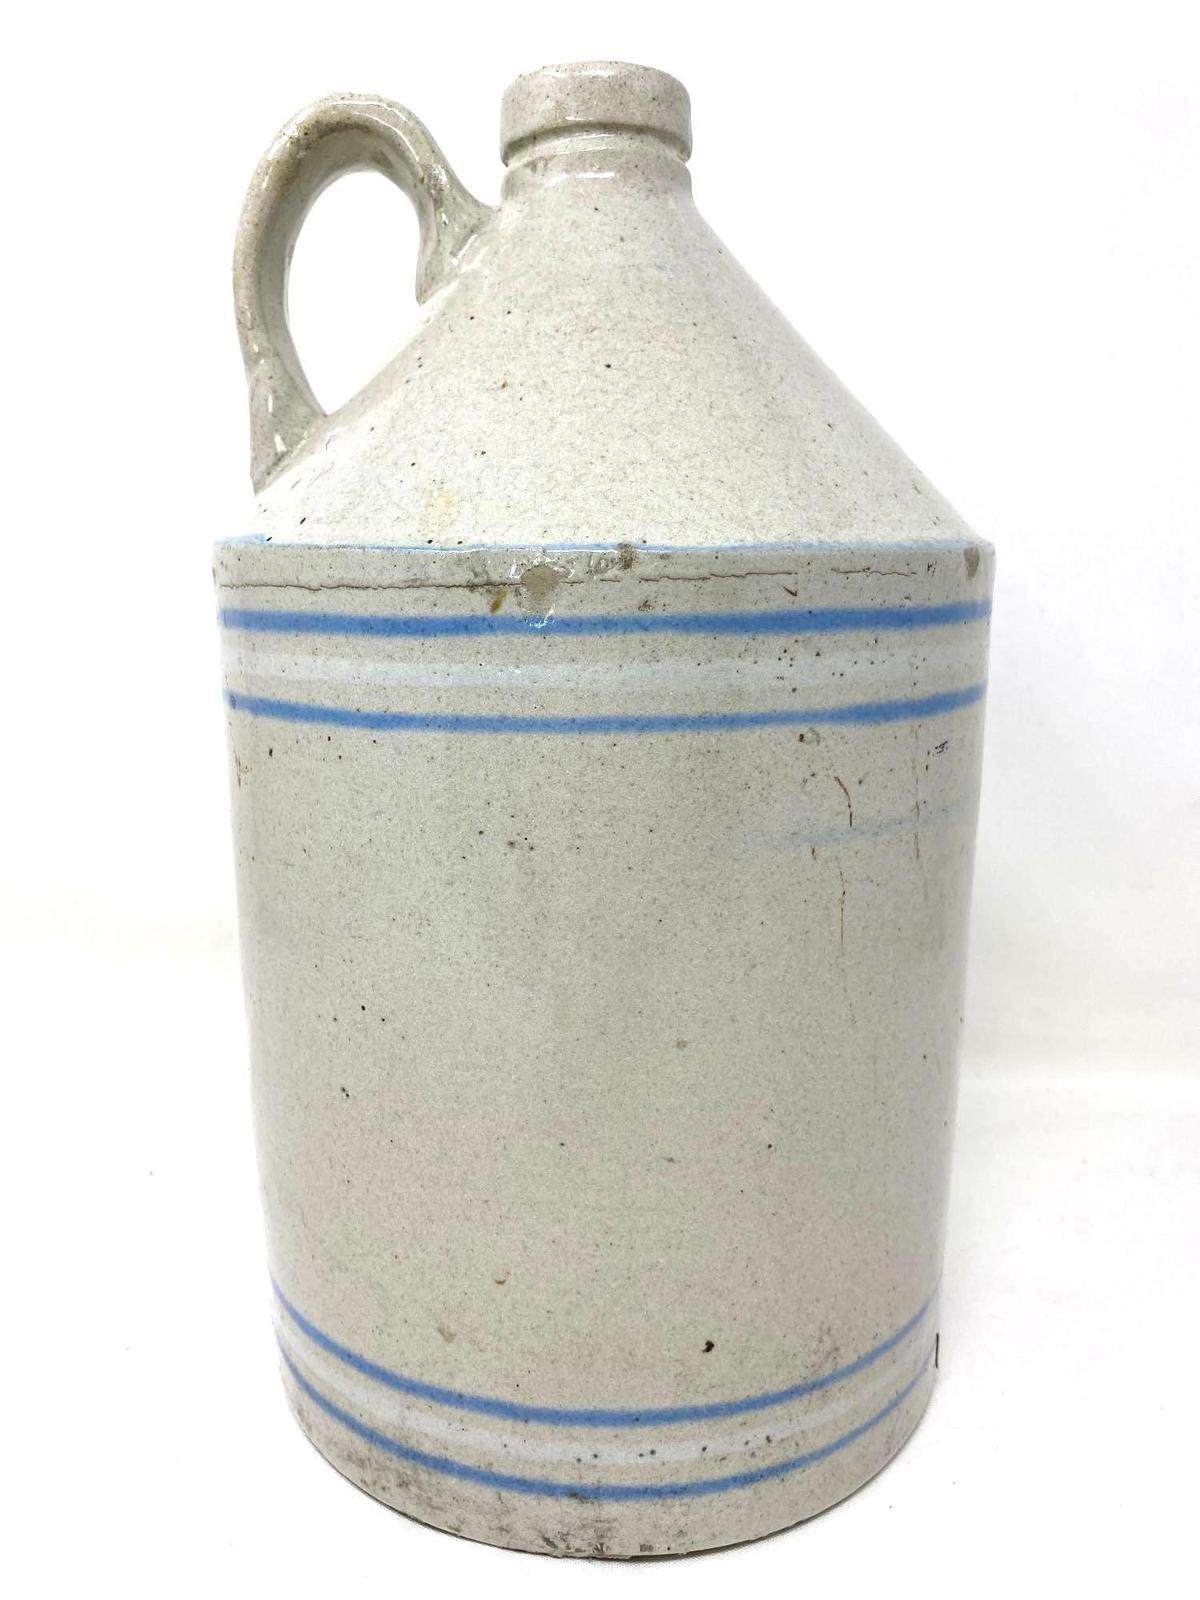 Antique white crock jug with blue and white lines